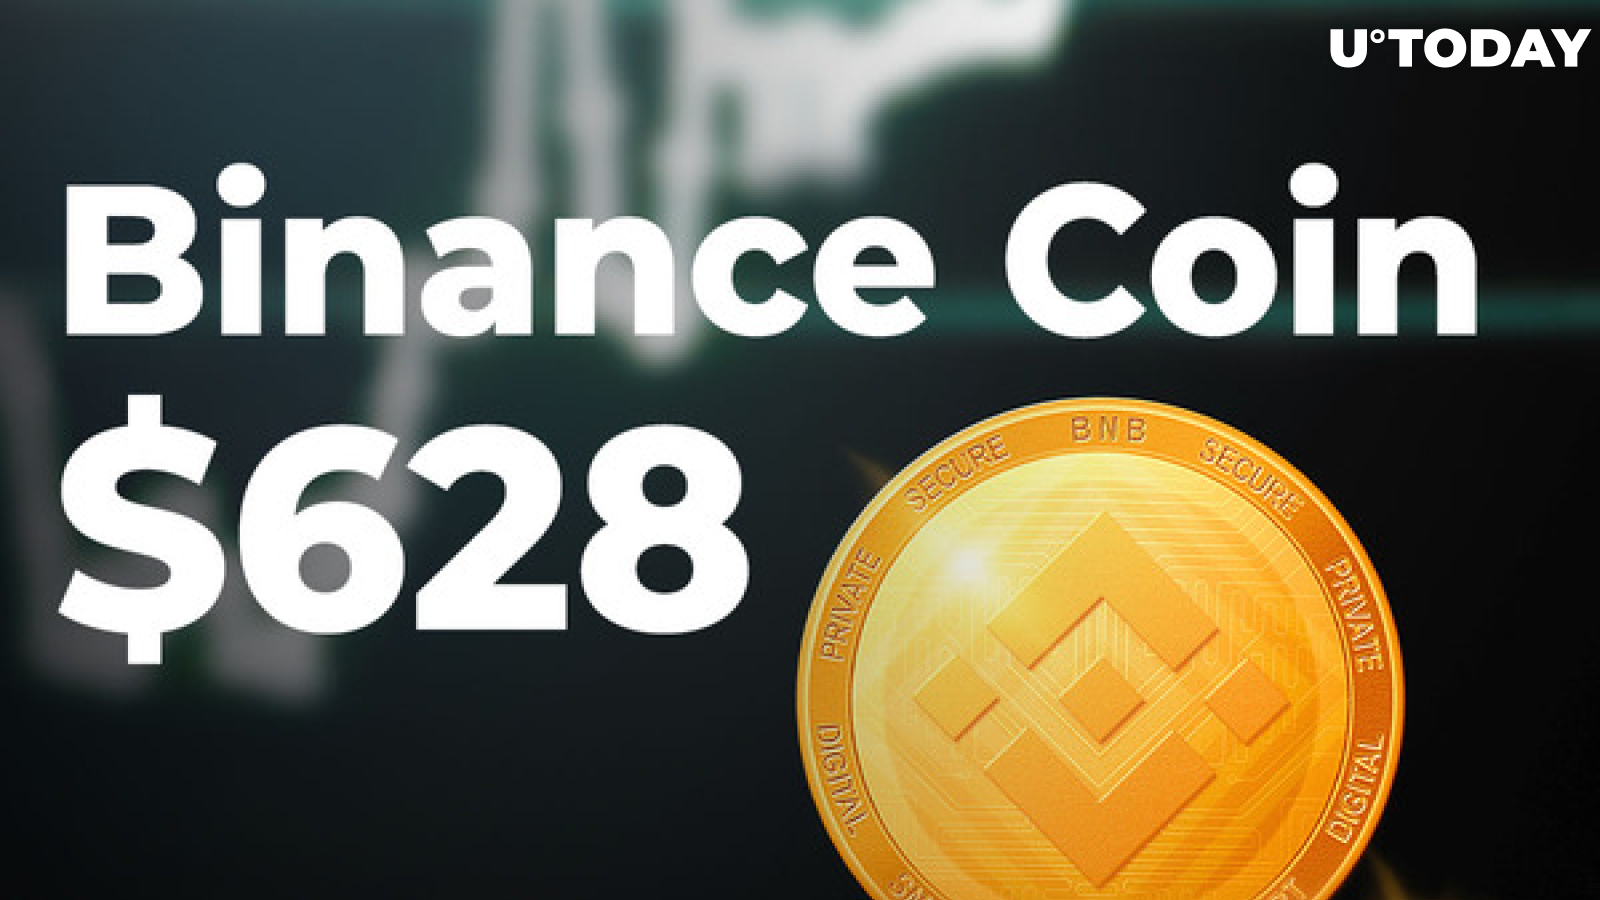 Binance Coin (BNB) Hits New All-Time High of $628 As Rally Continues